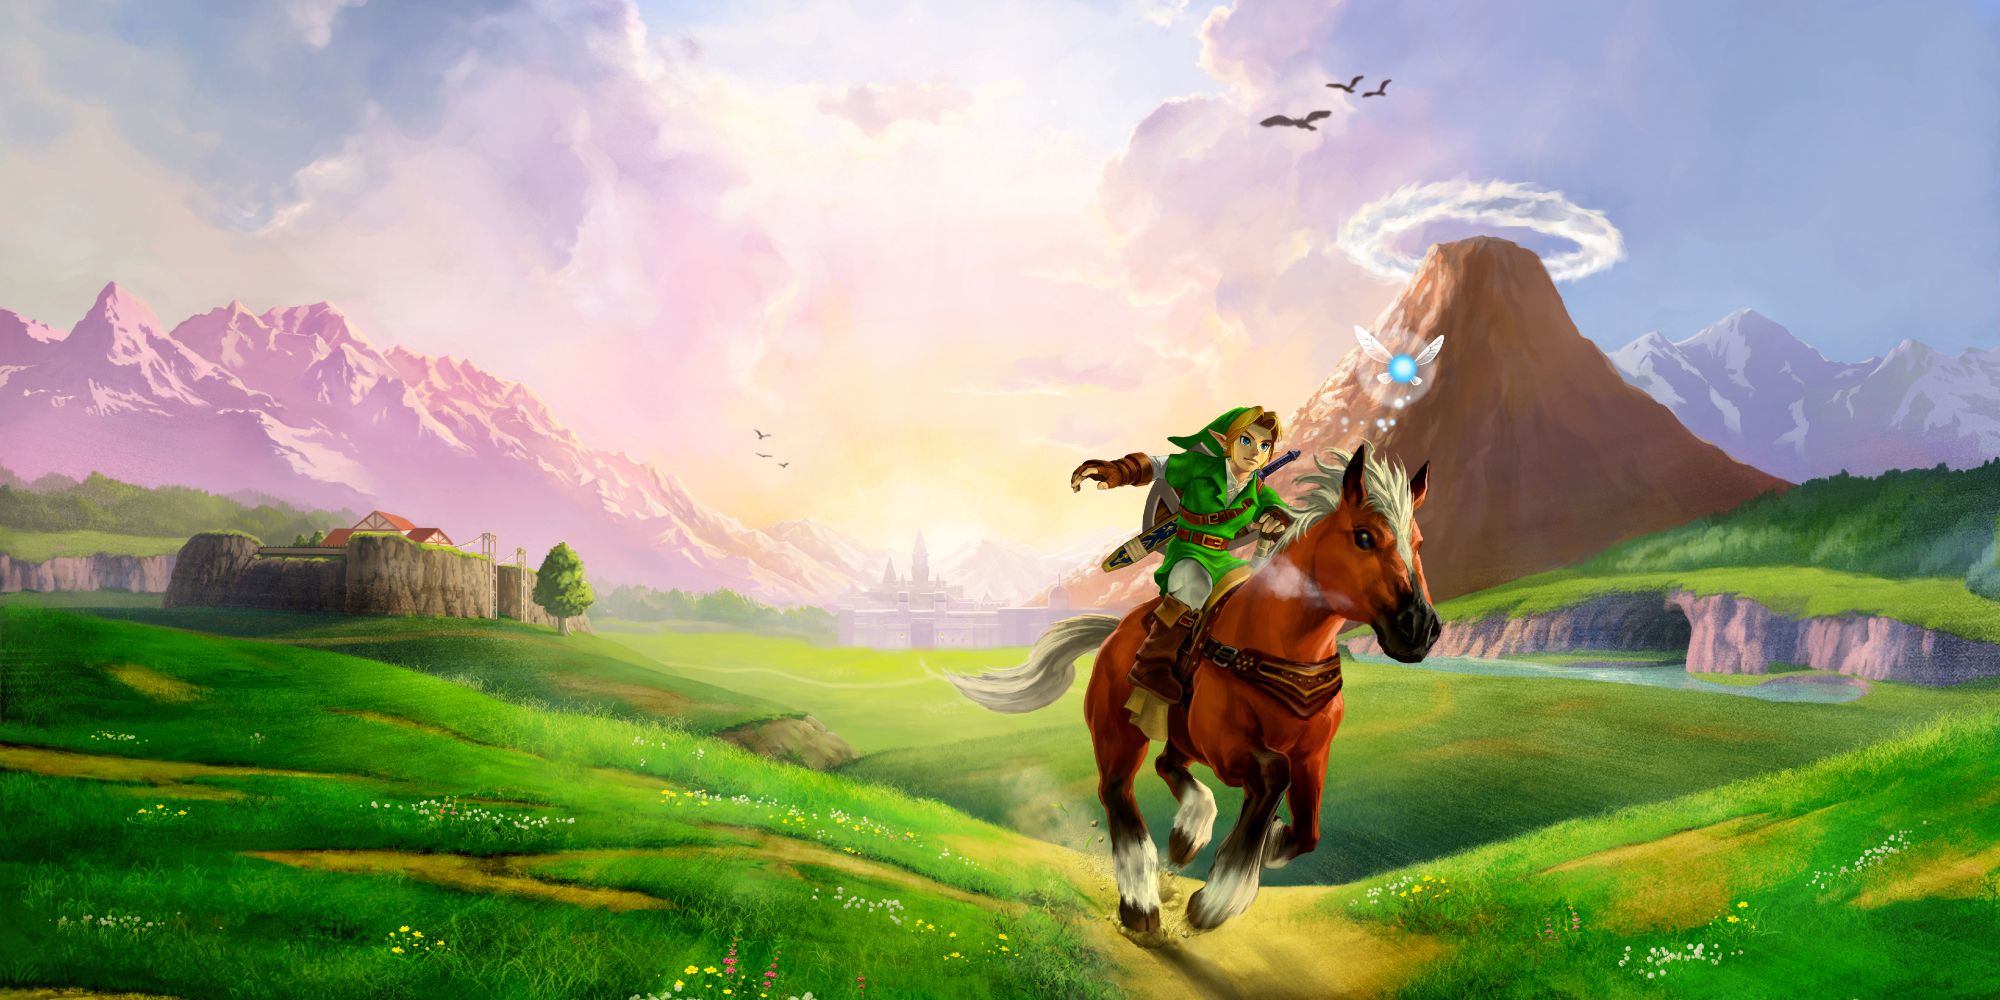 Artwork for Ocarina of Time 3D, showing Link riding Epona through Hyrule Field.